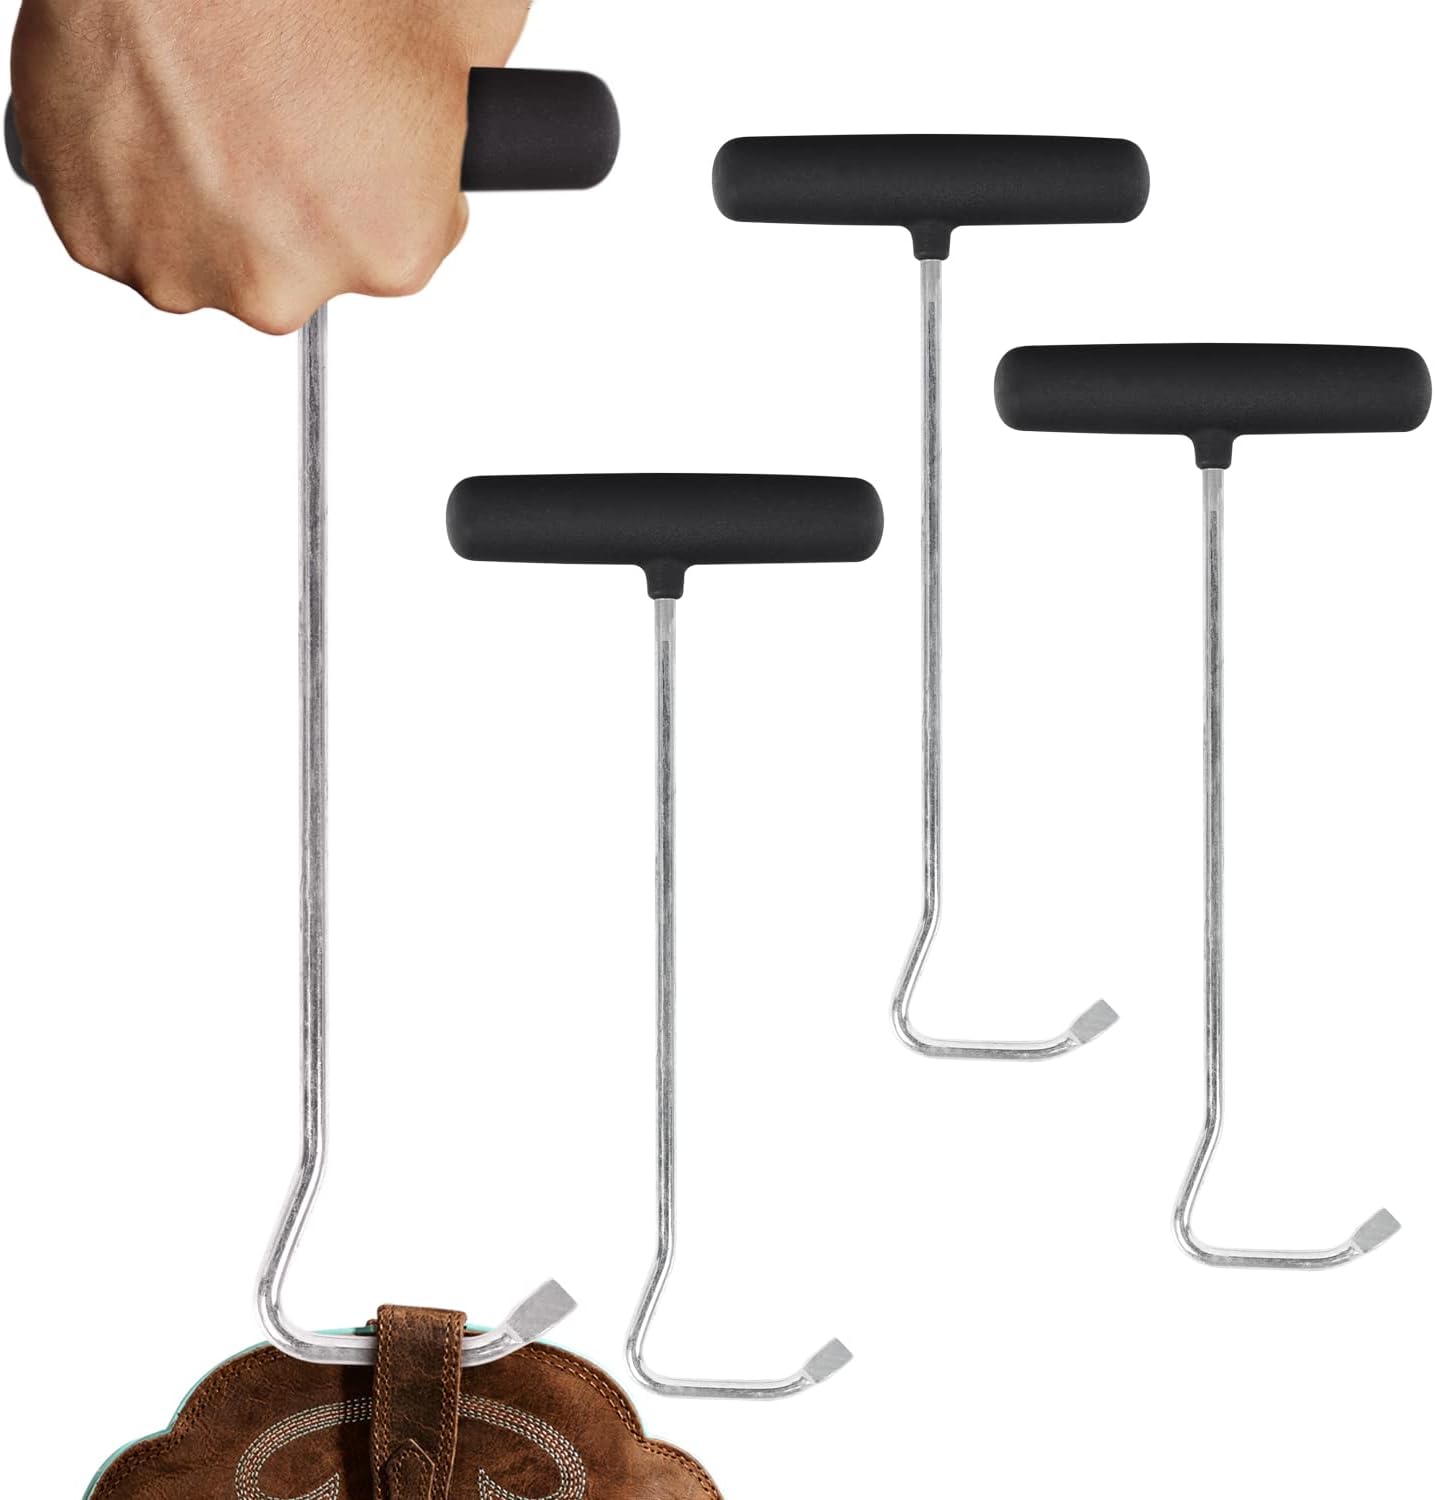 4 Pack] Boot Hooks Boot Pullers for Putting on Cowboy Boots